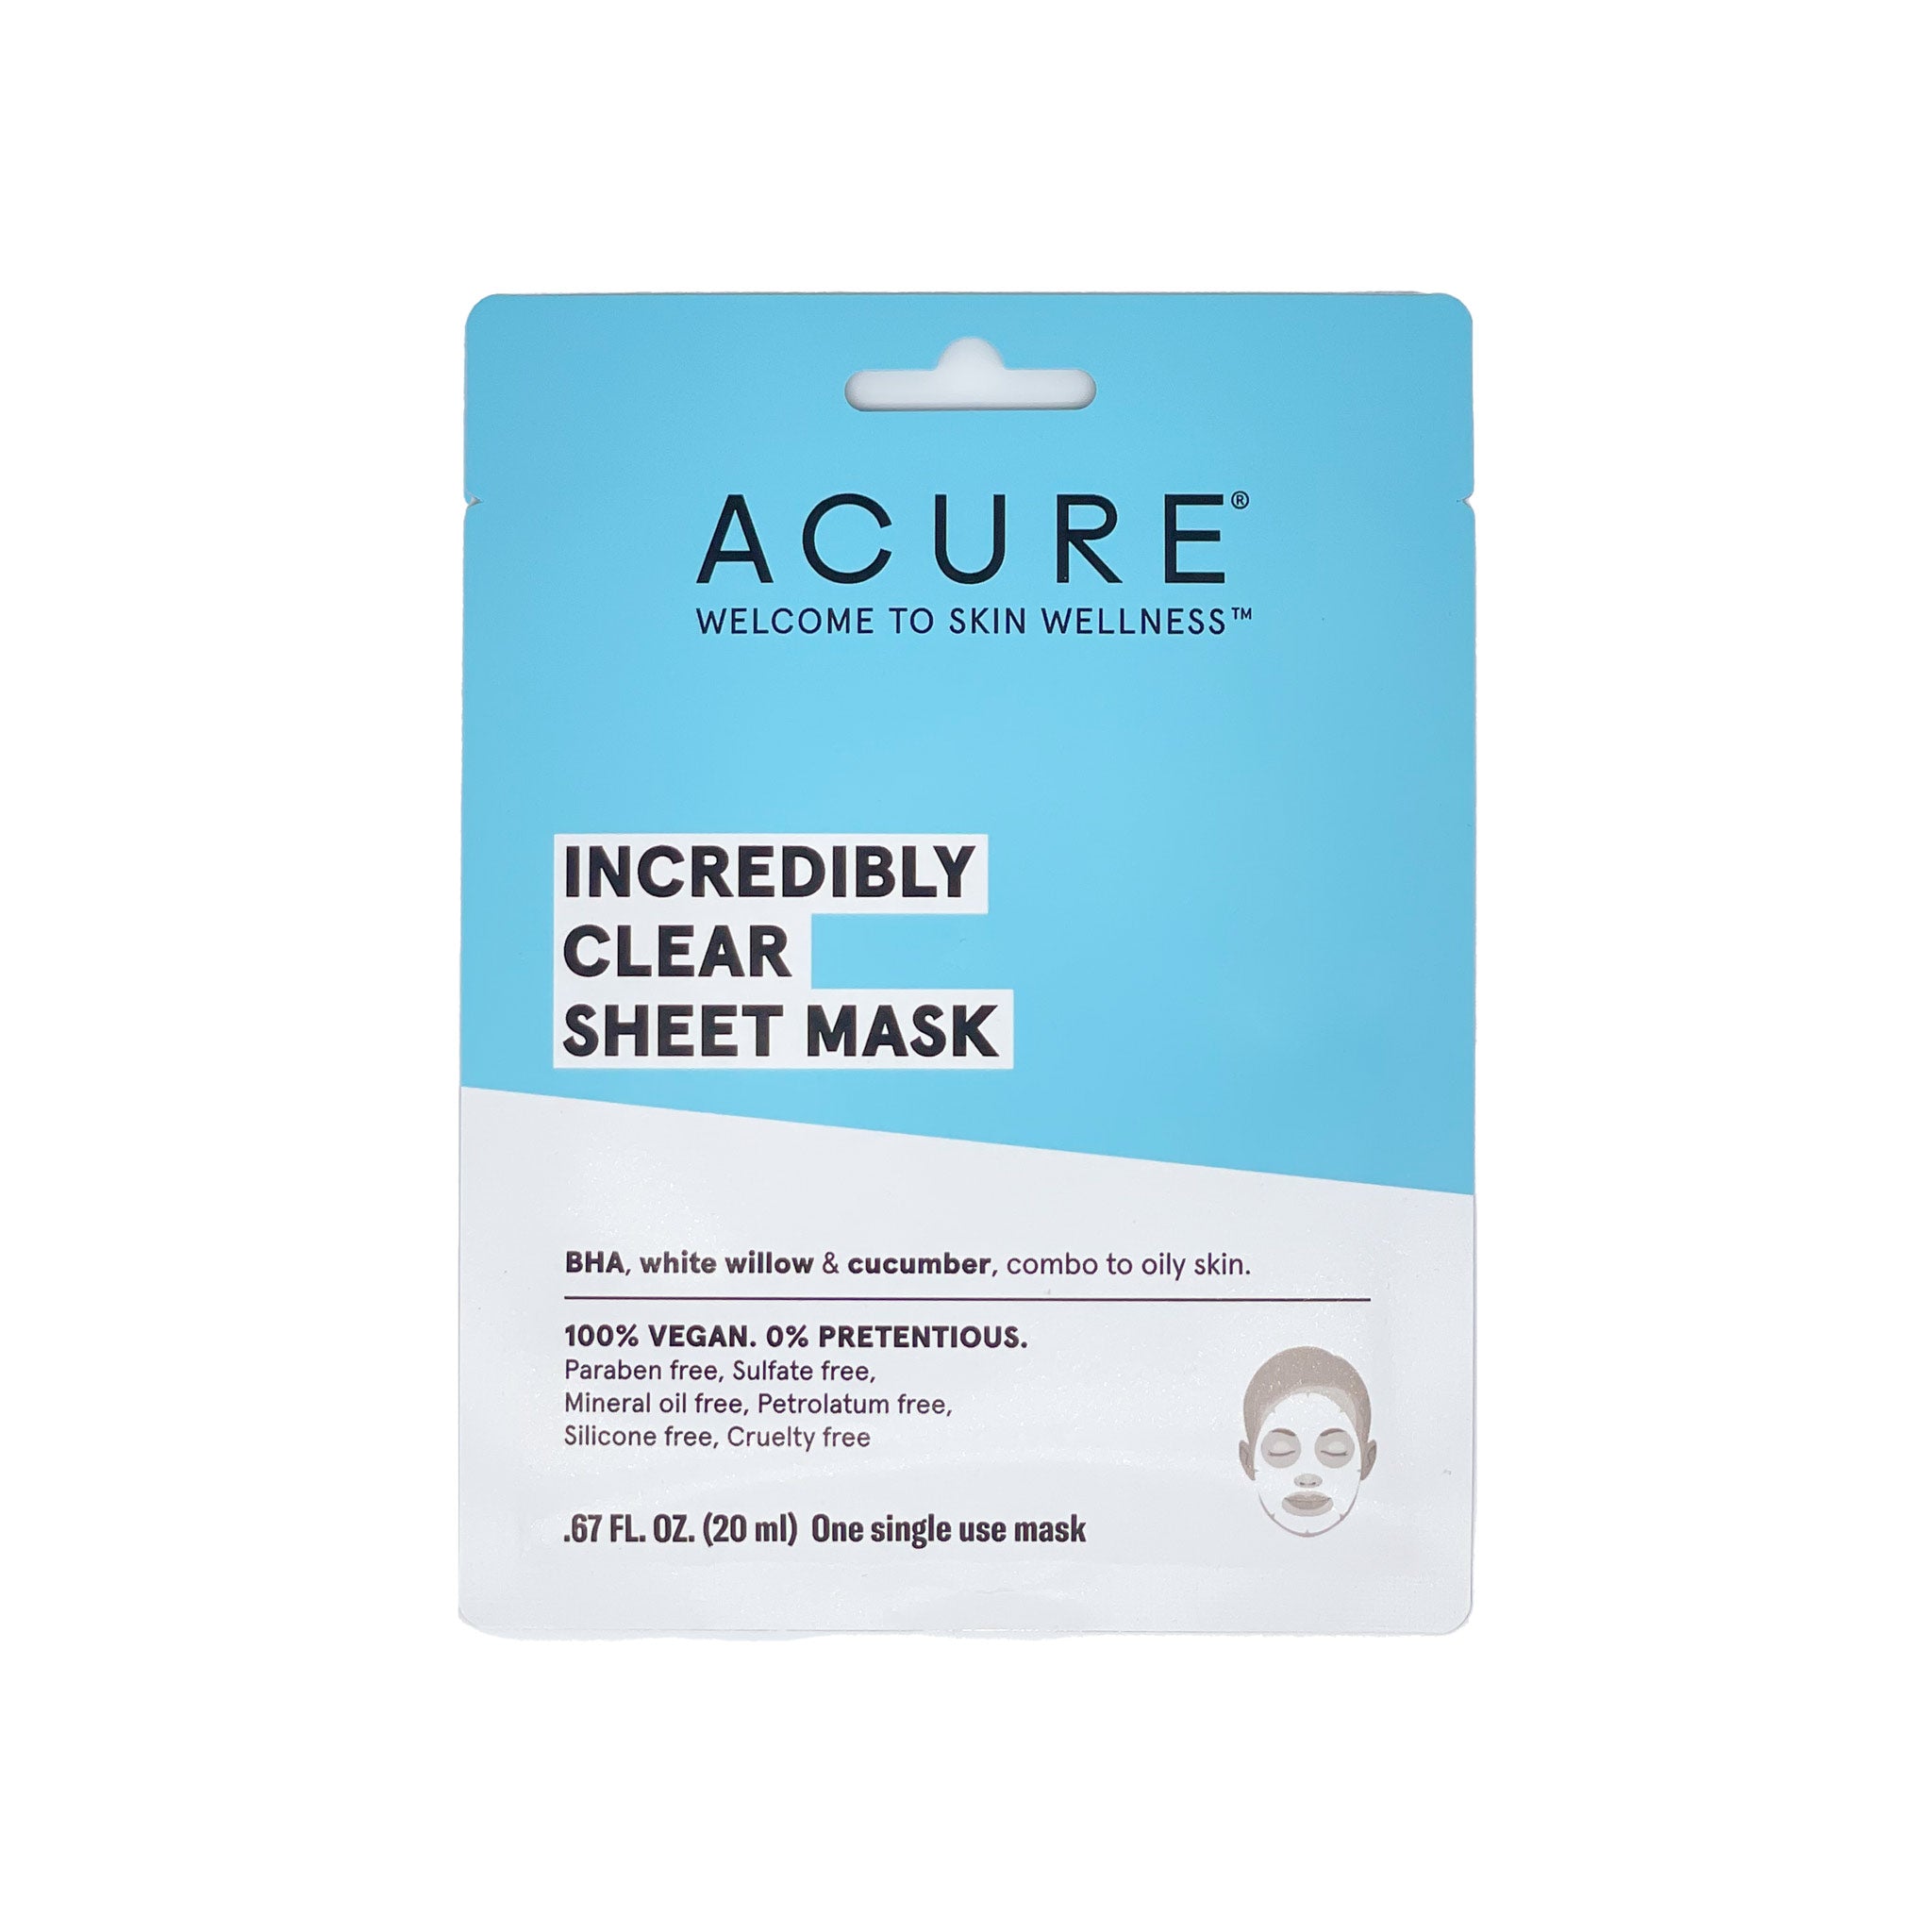 ACURE Incredibly Clear Sheet Mask 20mL